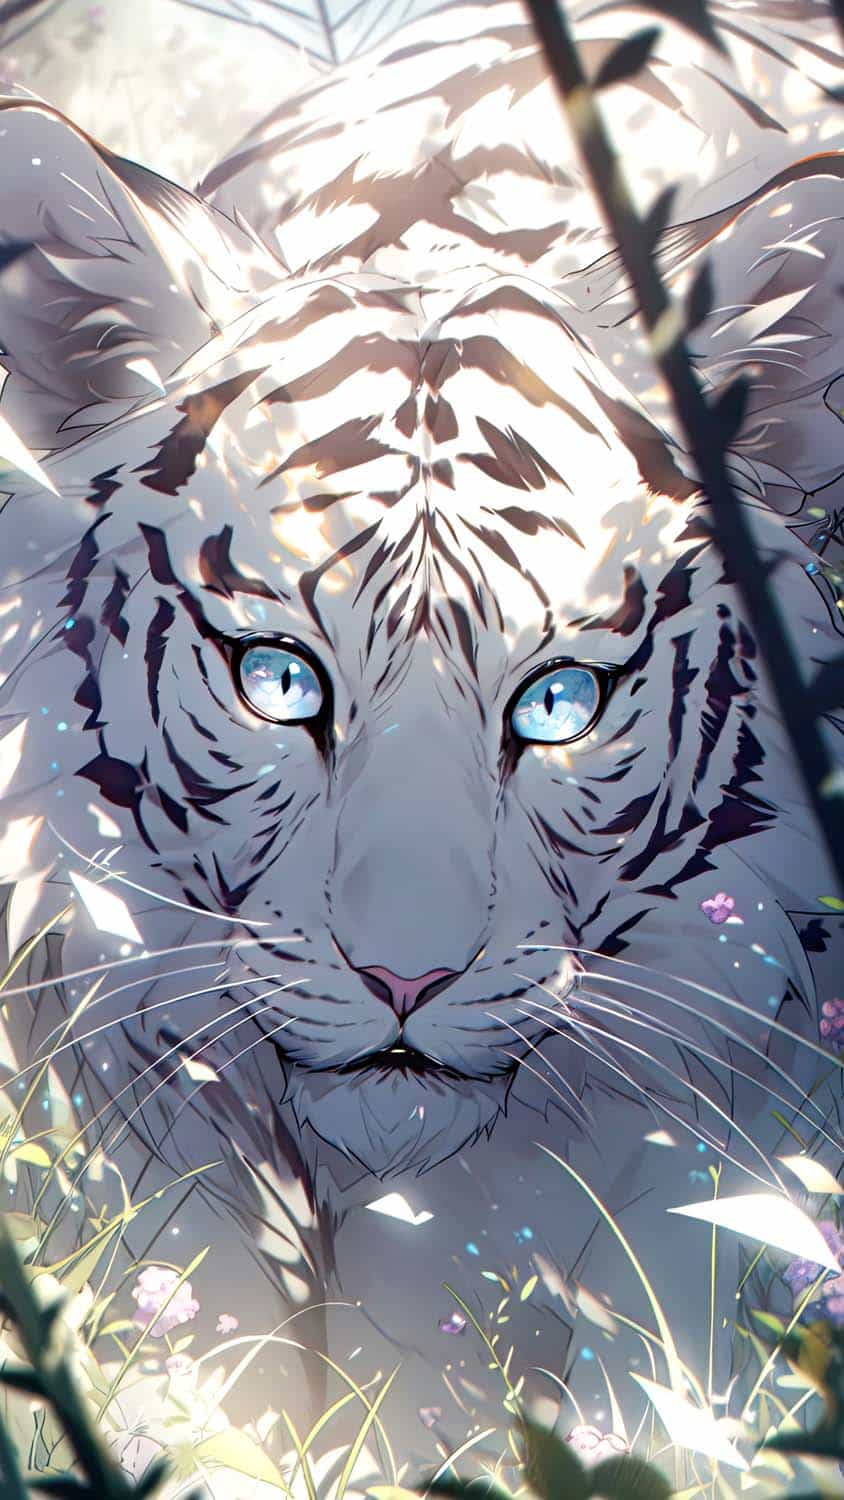 554240 1920x1440 free high resolution wallpaper white tiger  Rare Gallery  HD Wallpapers